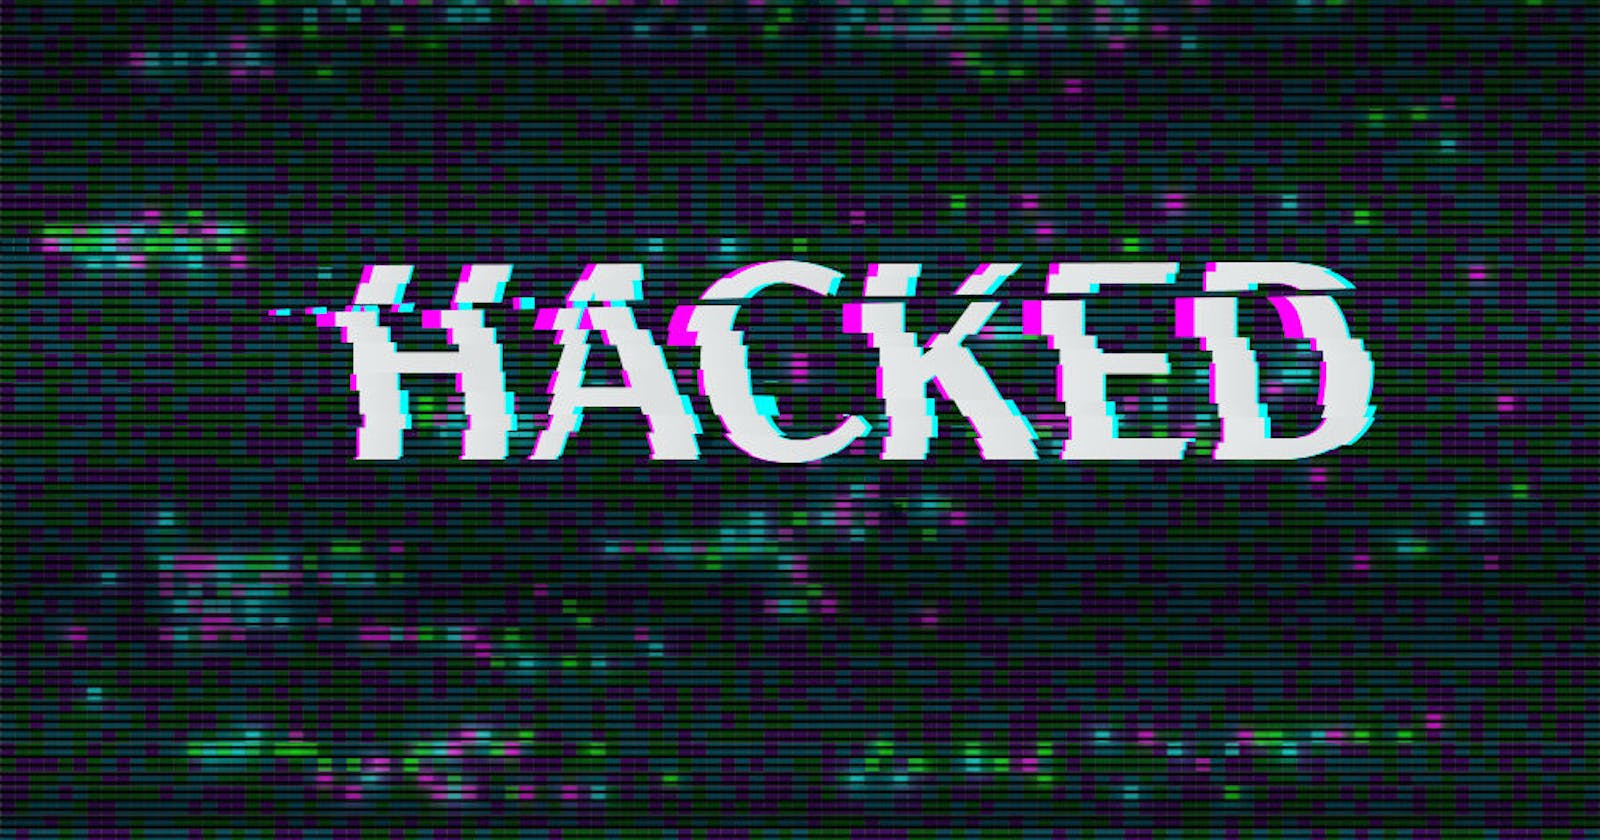 You've been Hacked!